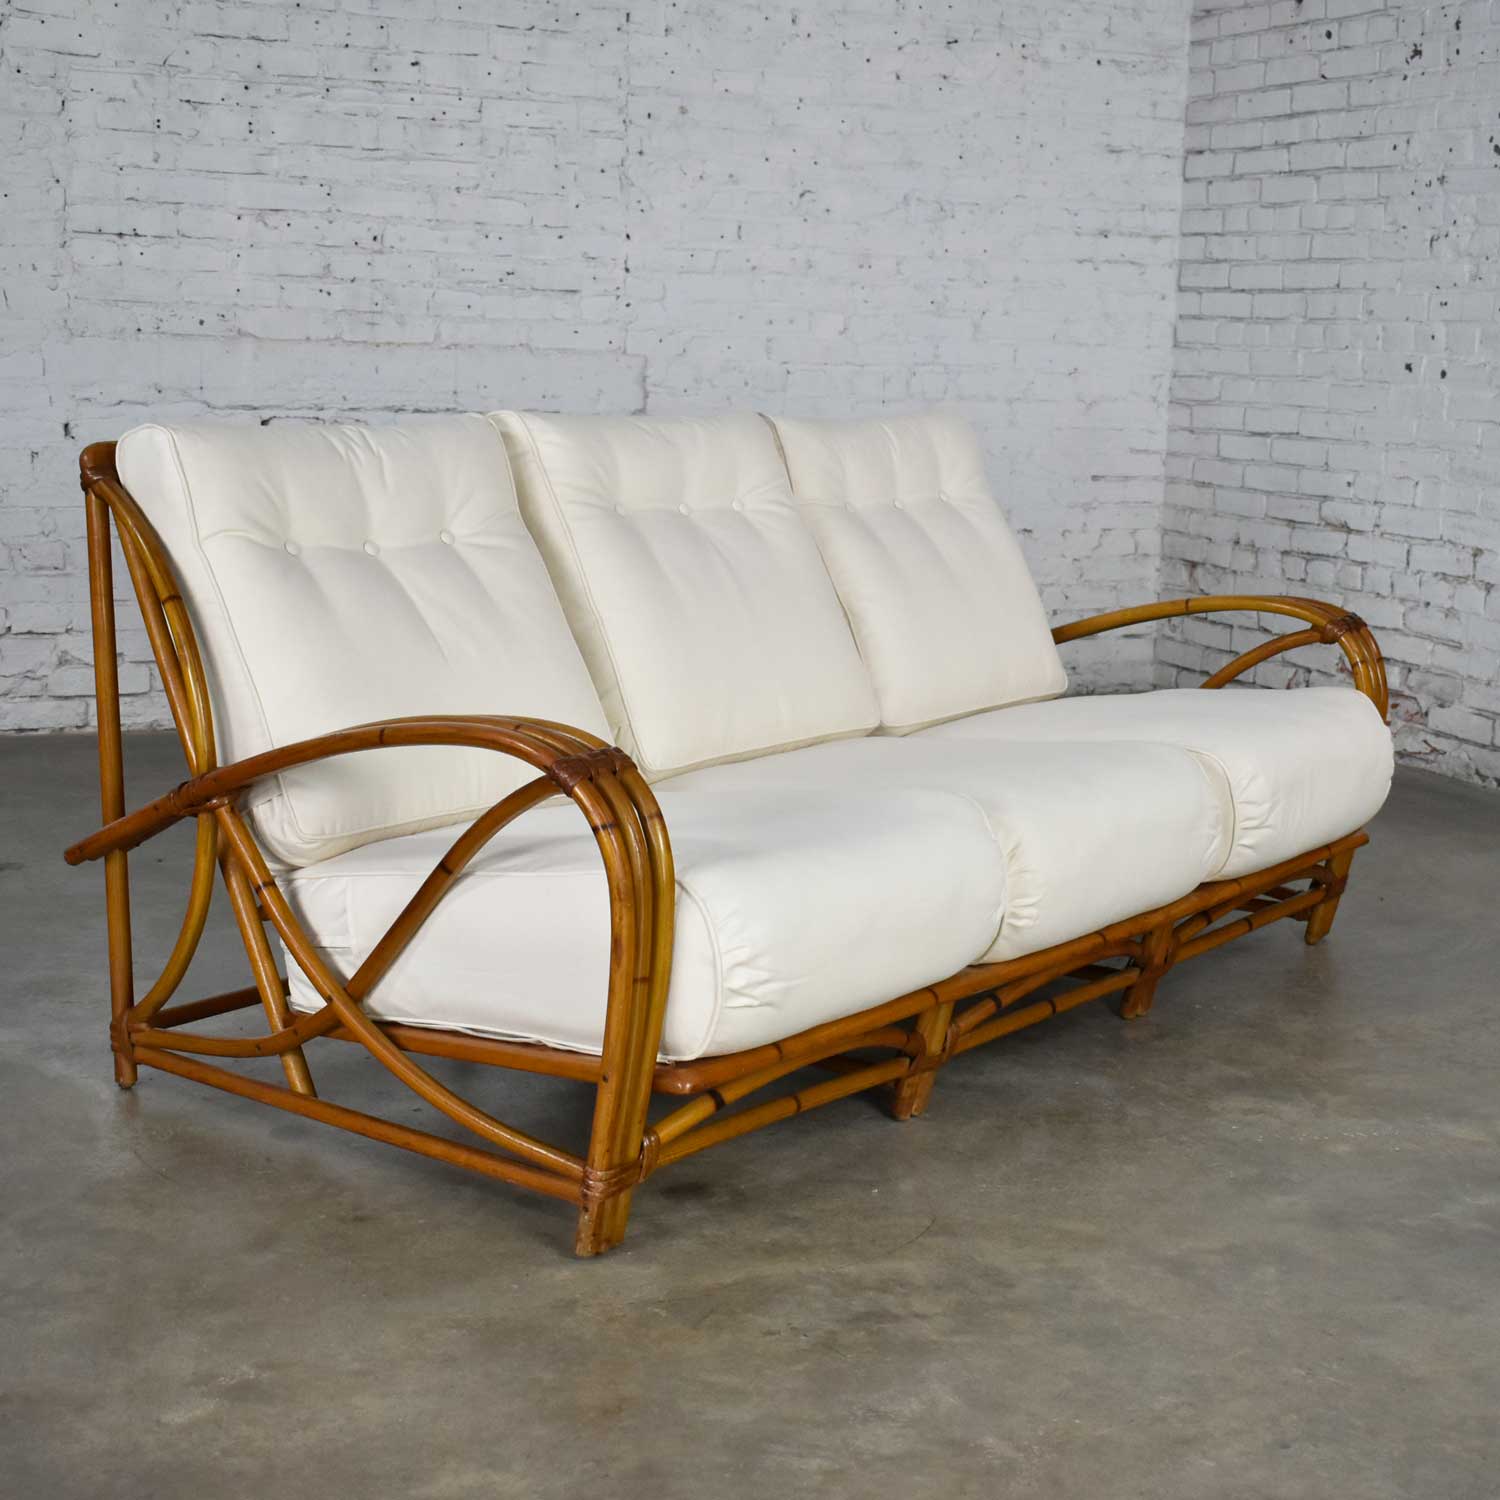 Vintage Heywood Wakefield Rattan Sofa New Off-White Canvas Upholstery